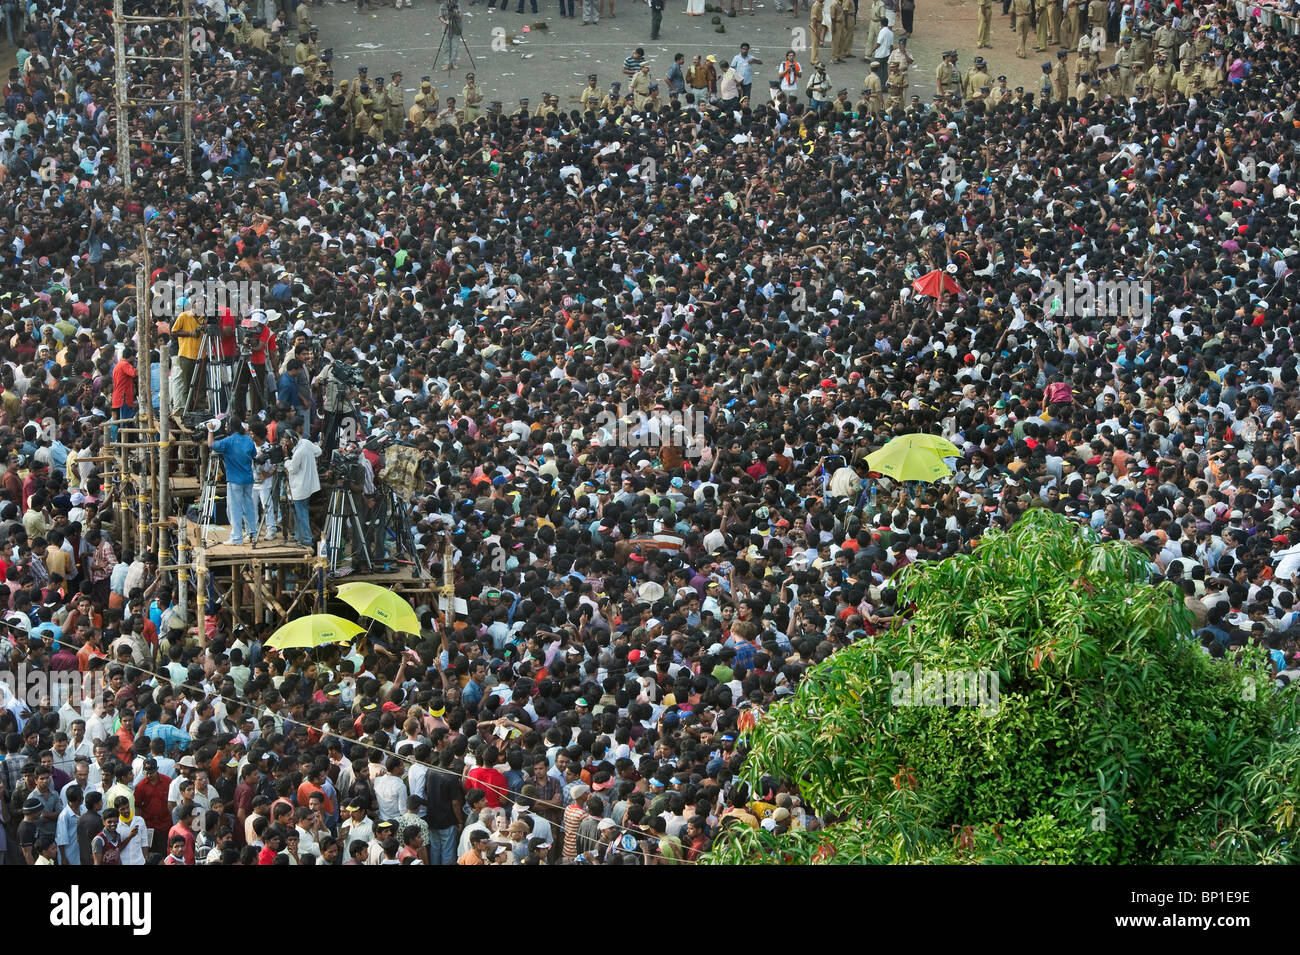 India Kerala Thrissur a large crowd during the Pooram Elephant Festival Stock Photo